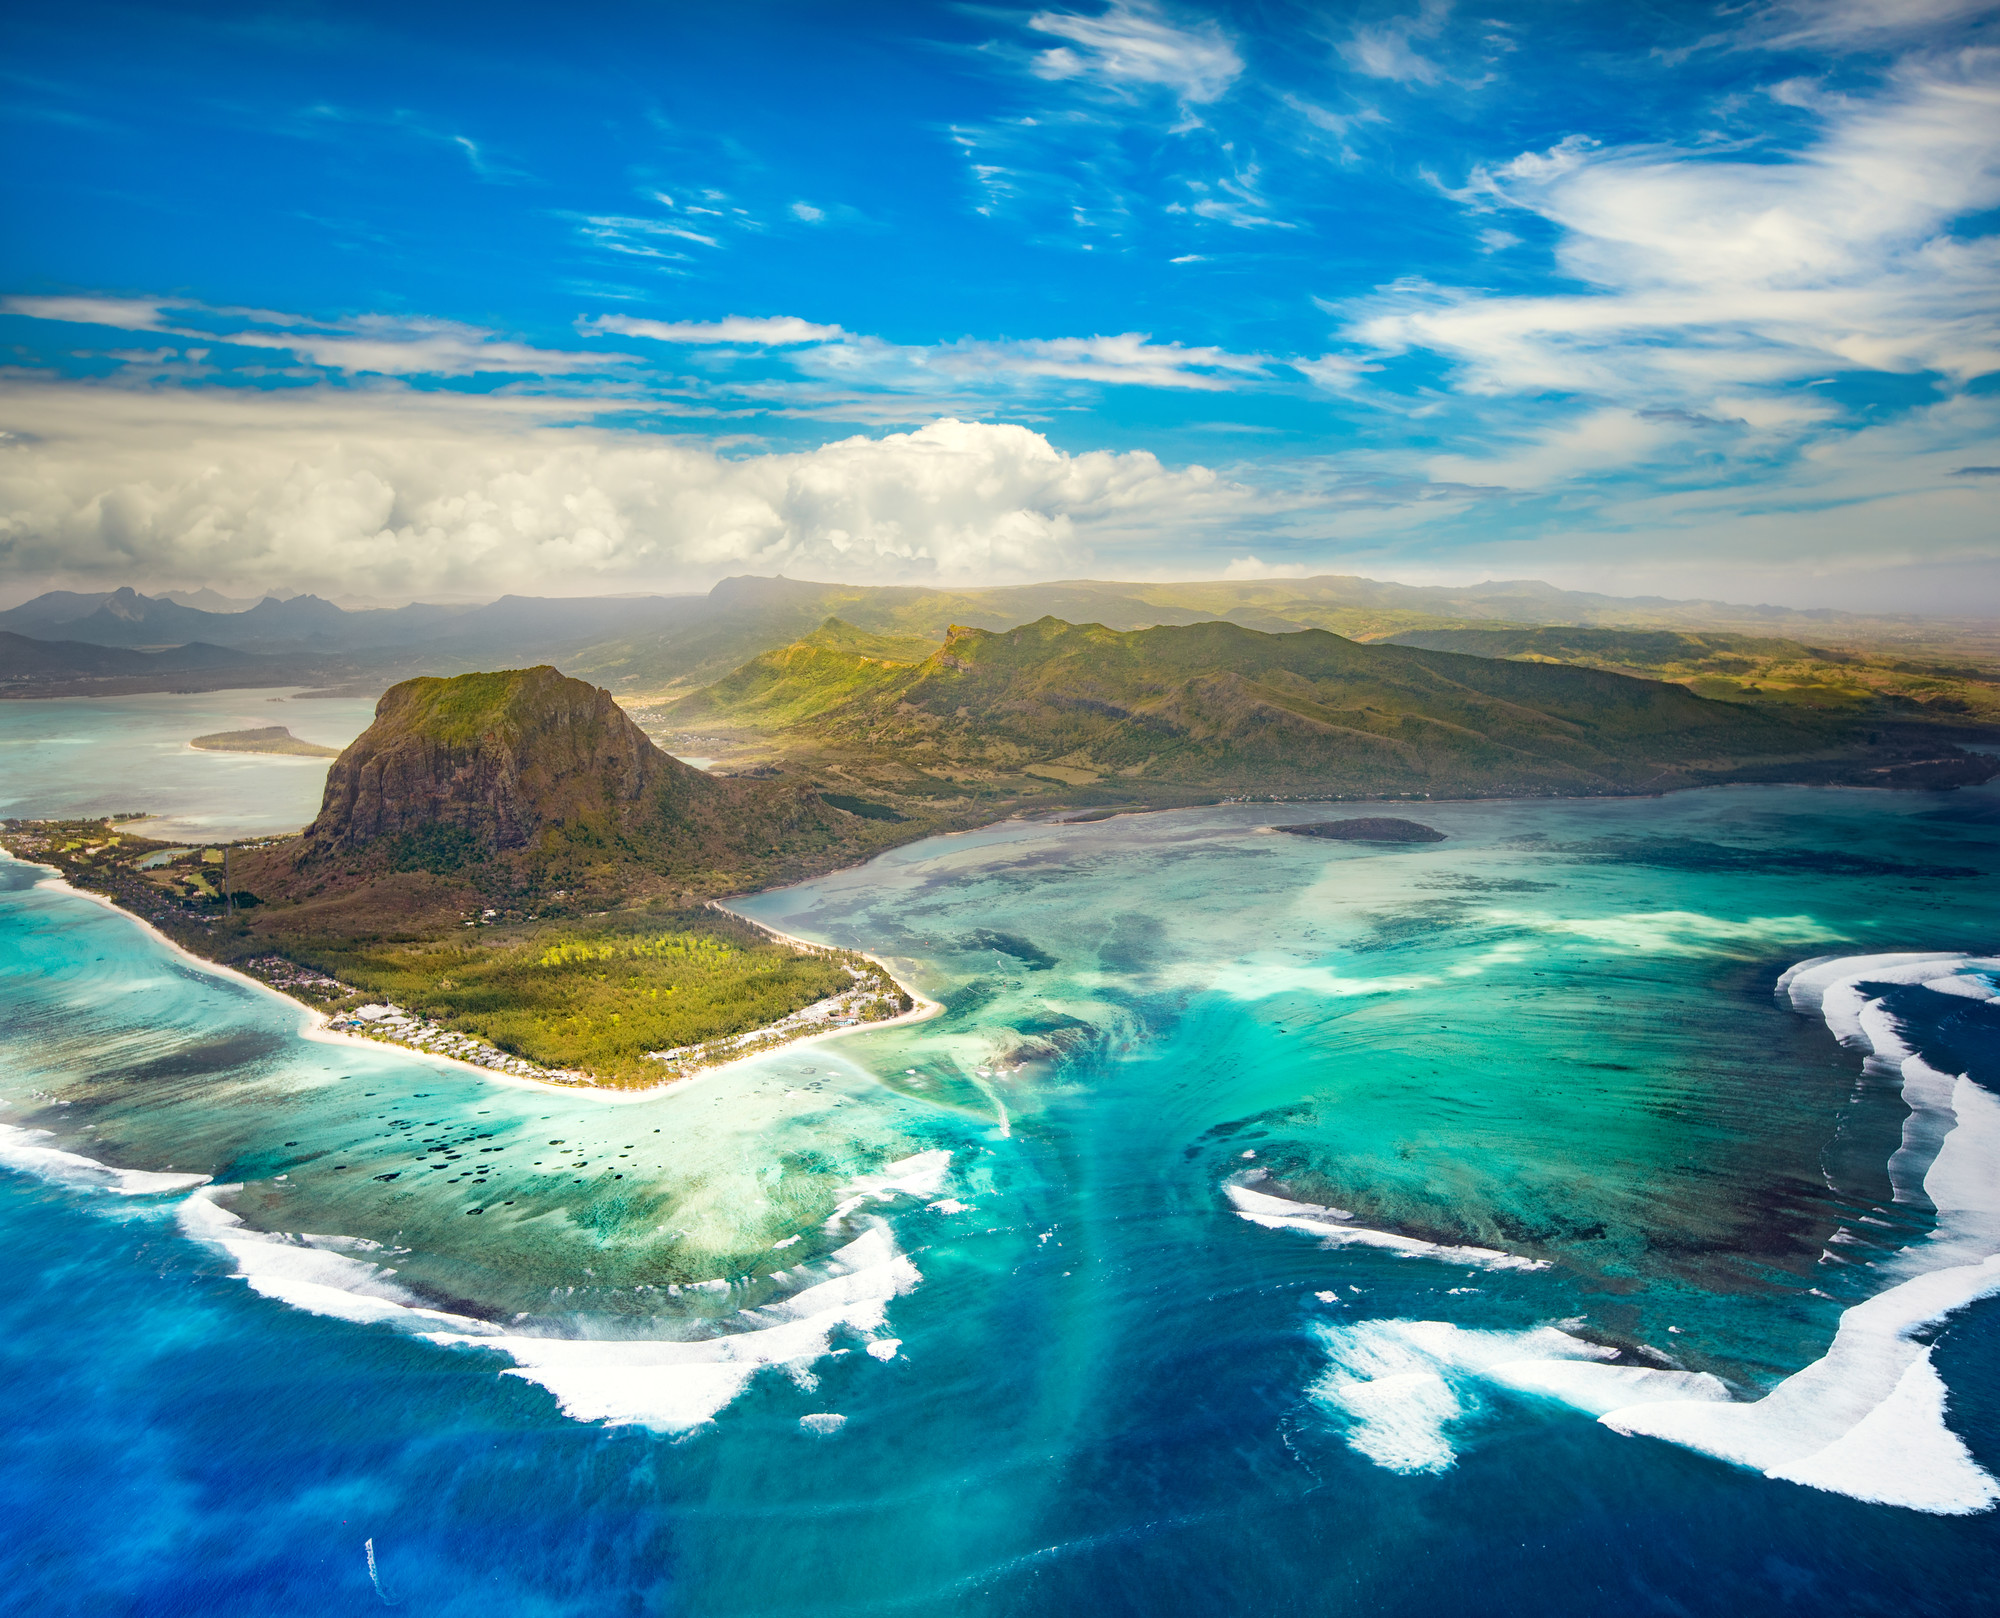 Aerial view of the underwater waterfall and Le Morne Brabant peninsula. Amazing Mauritius landscape